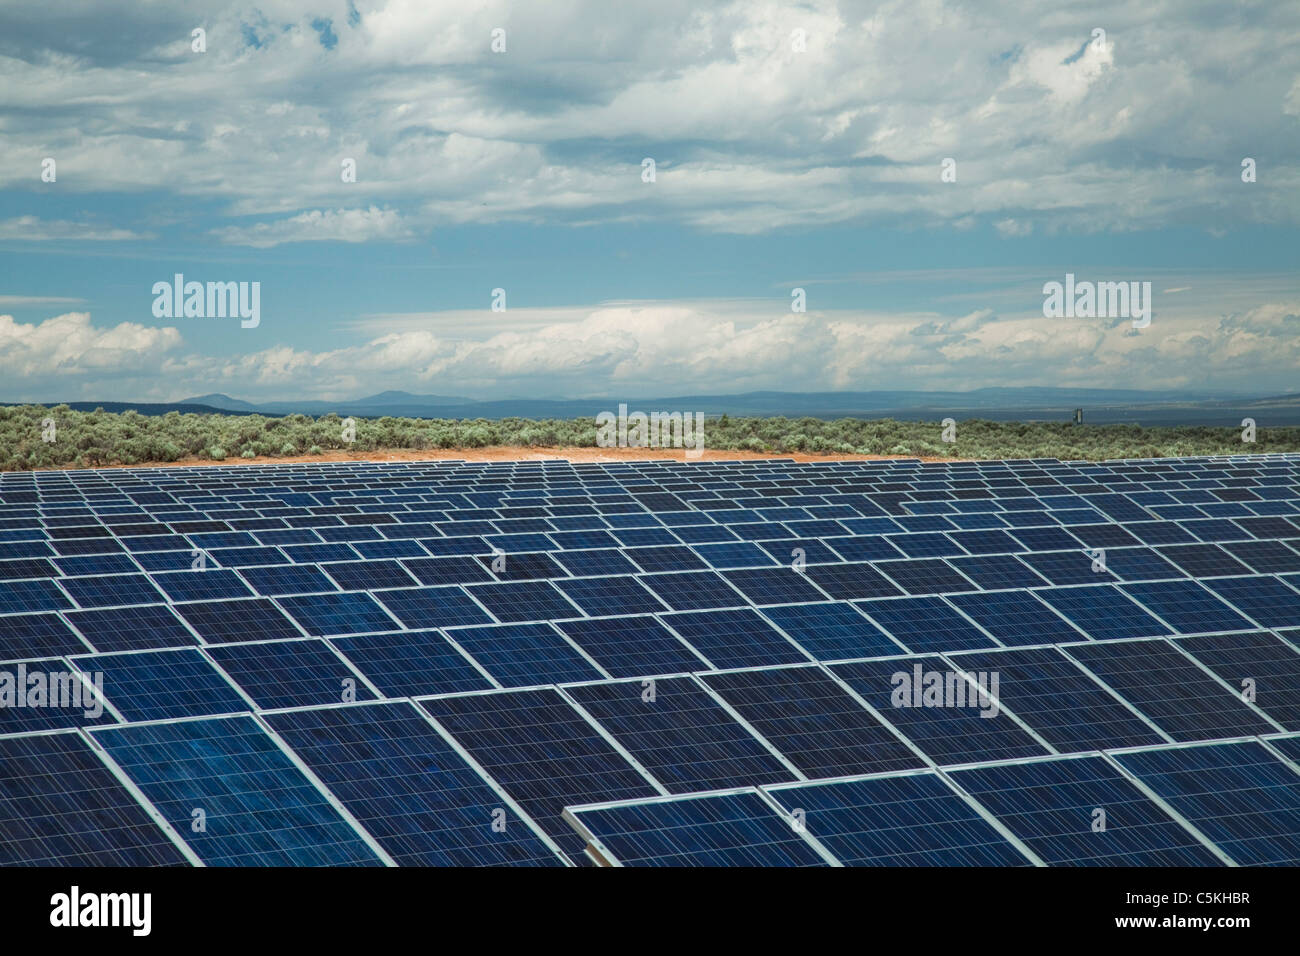 Solar panels providing energy for college campus. Stock Photo